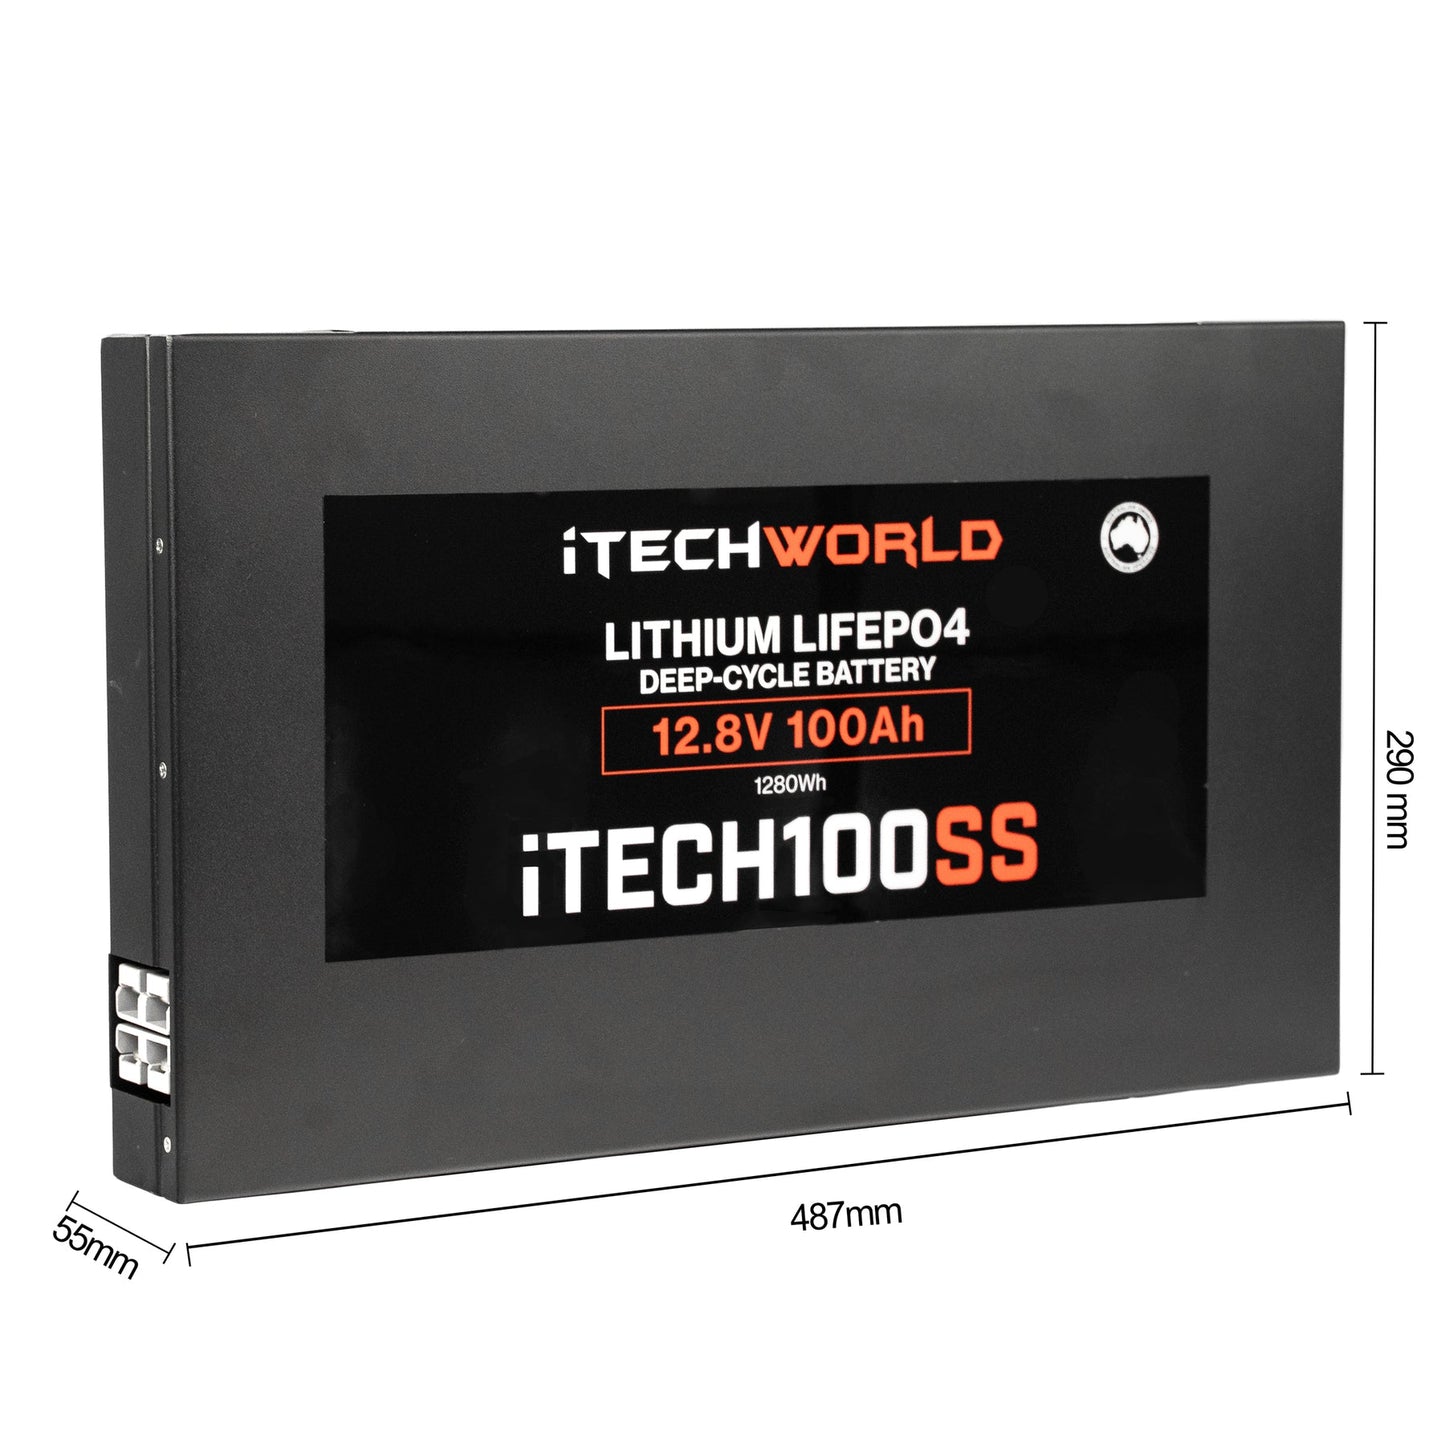 Itech100ss 100Ah 12V Super Slim Deep Cycle Lithium Battery - Preorder ETA END OF JUNE / EARLY JULY